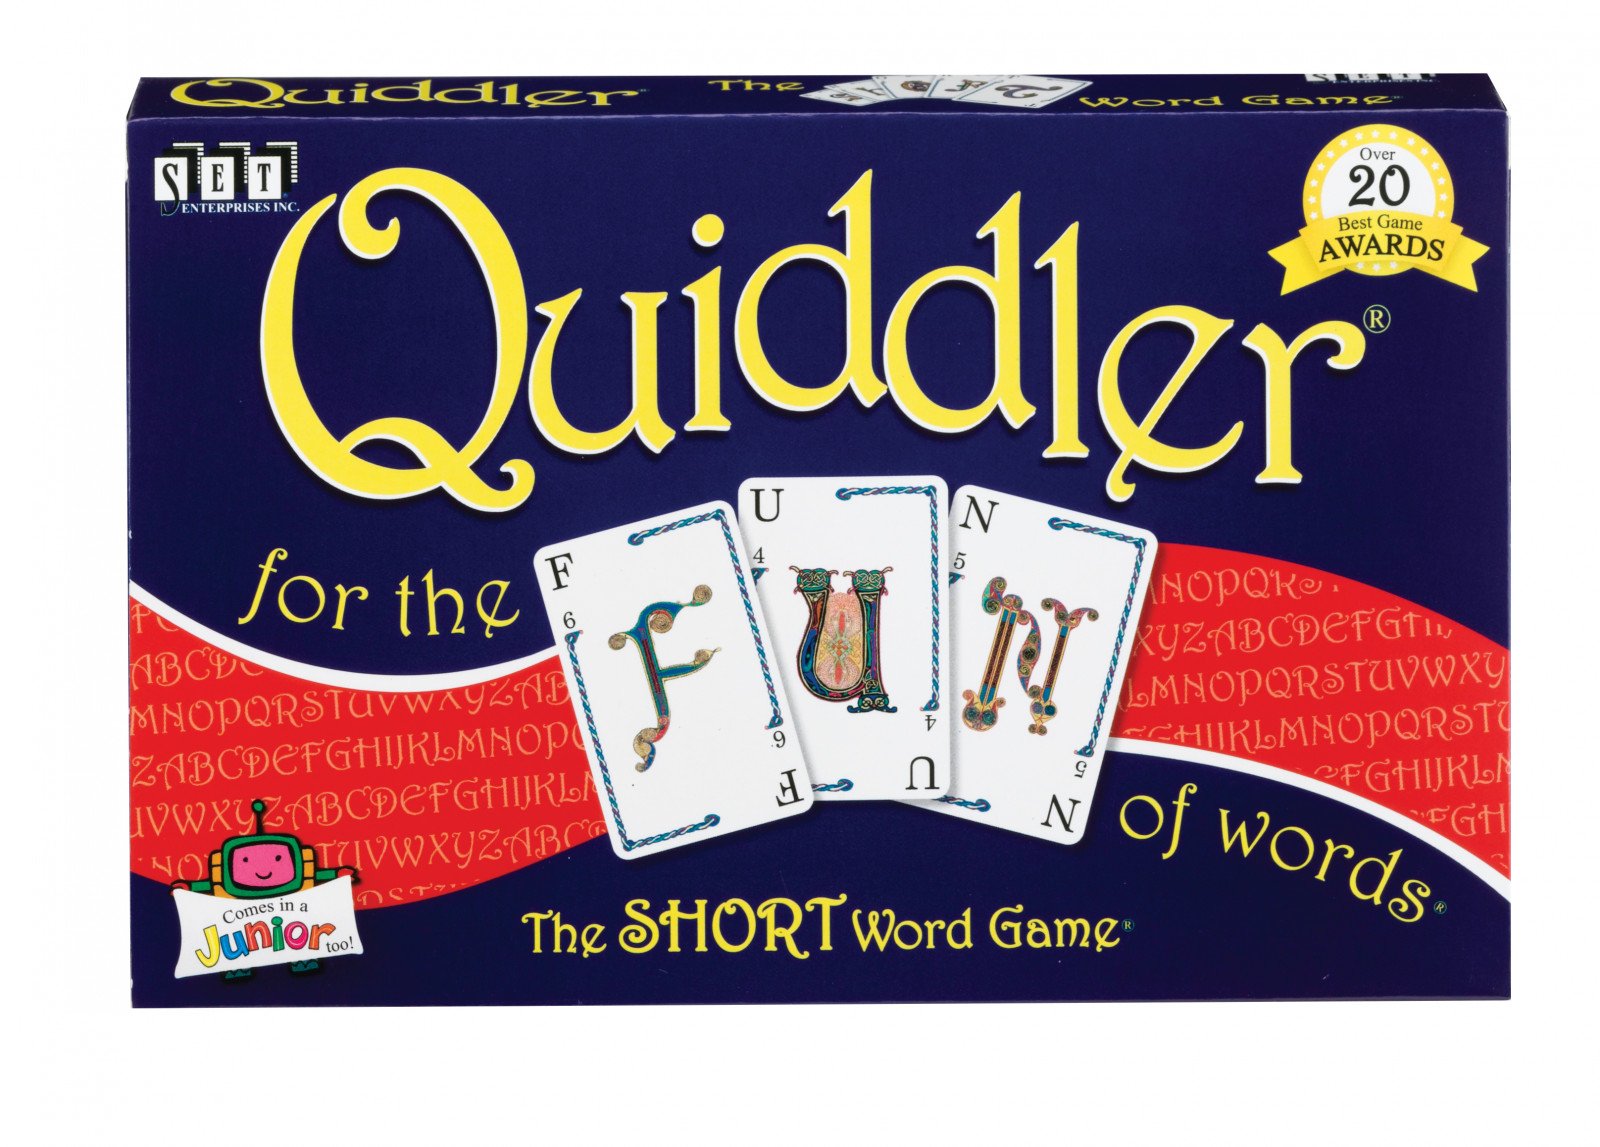 QUIDDLER THE SHORT WORD GAME